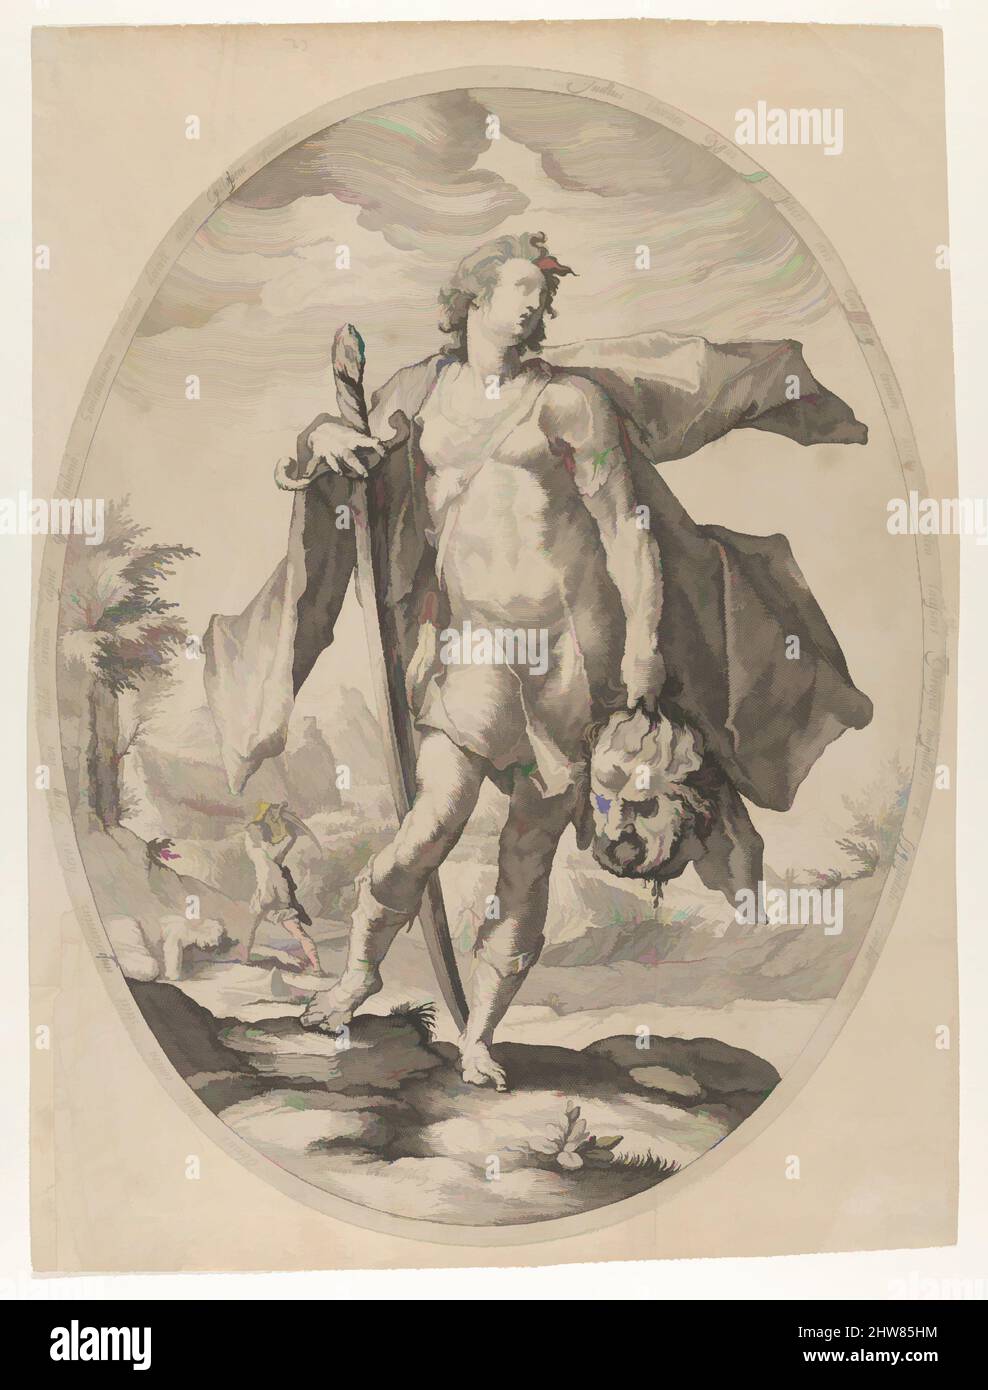 Art inspired by David from Heroes and Heroines of the Old Testament, ca. 1597, Engraving, Sheet: 17 1/2 x 13 in. (44.5 x 33 cm), Prints, Nicolaes Braeu (Netherlandish, active Haarlem, ca. 1586–died 1600), After Hendrick Goltzius (Netherlandish, Mühlbracht 1558–1617 Haarlem, Classic works modernized by Artotop with a splash of modernity. Shapes, color and value, eye-catching visual impact on art. Emotions through freedom of artworks in a contemporary way. A timeless message pursuing a wildly creative new direction. Artists turning to the digital medium and creating the Artotop NFT Stock Photo